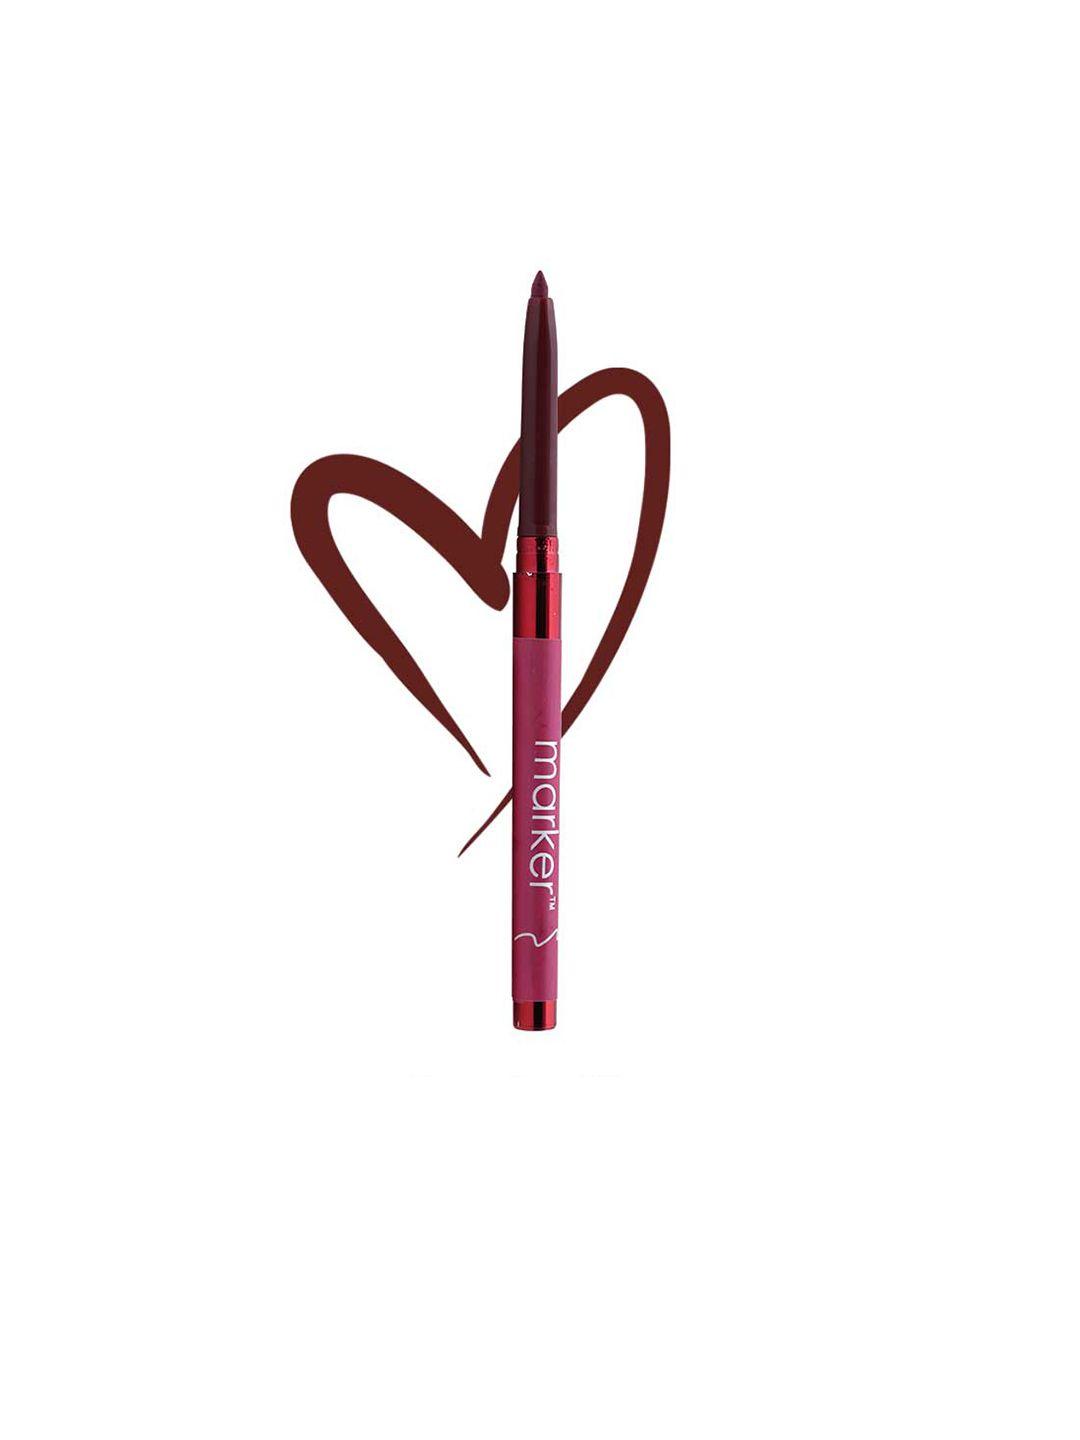 beautyrelay london outline the lips long-lasting lip liner with vitamin e 0.27g - browning glory